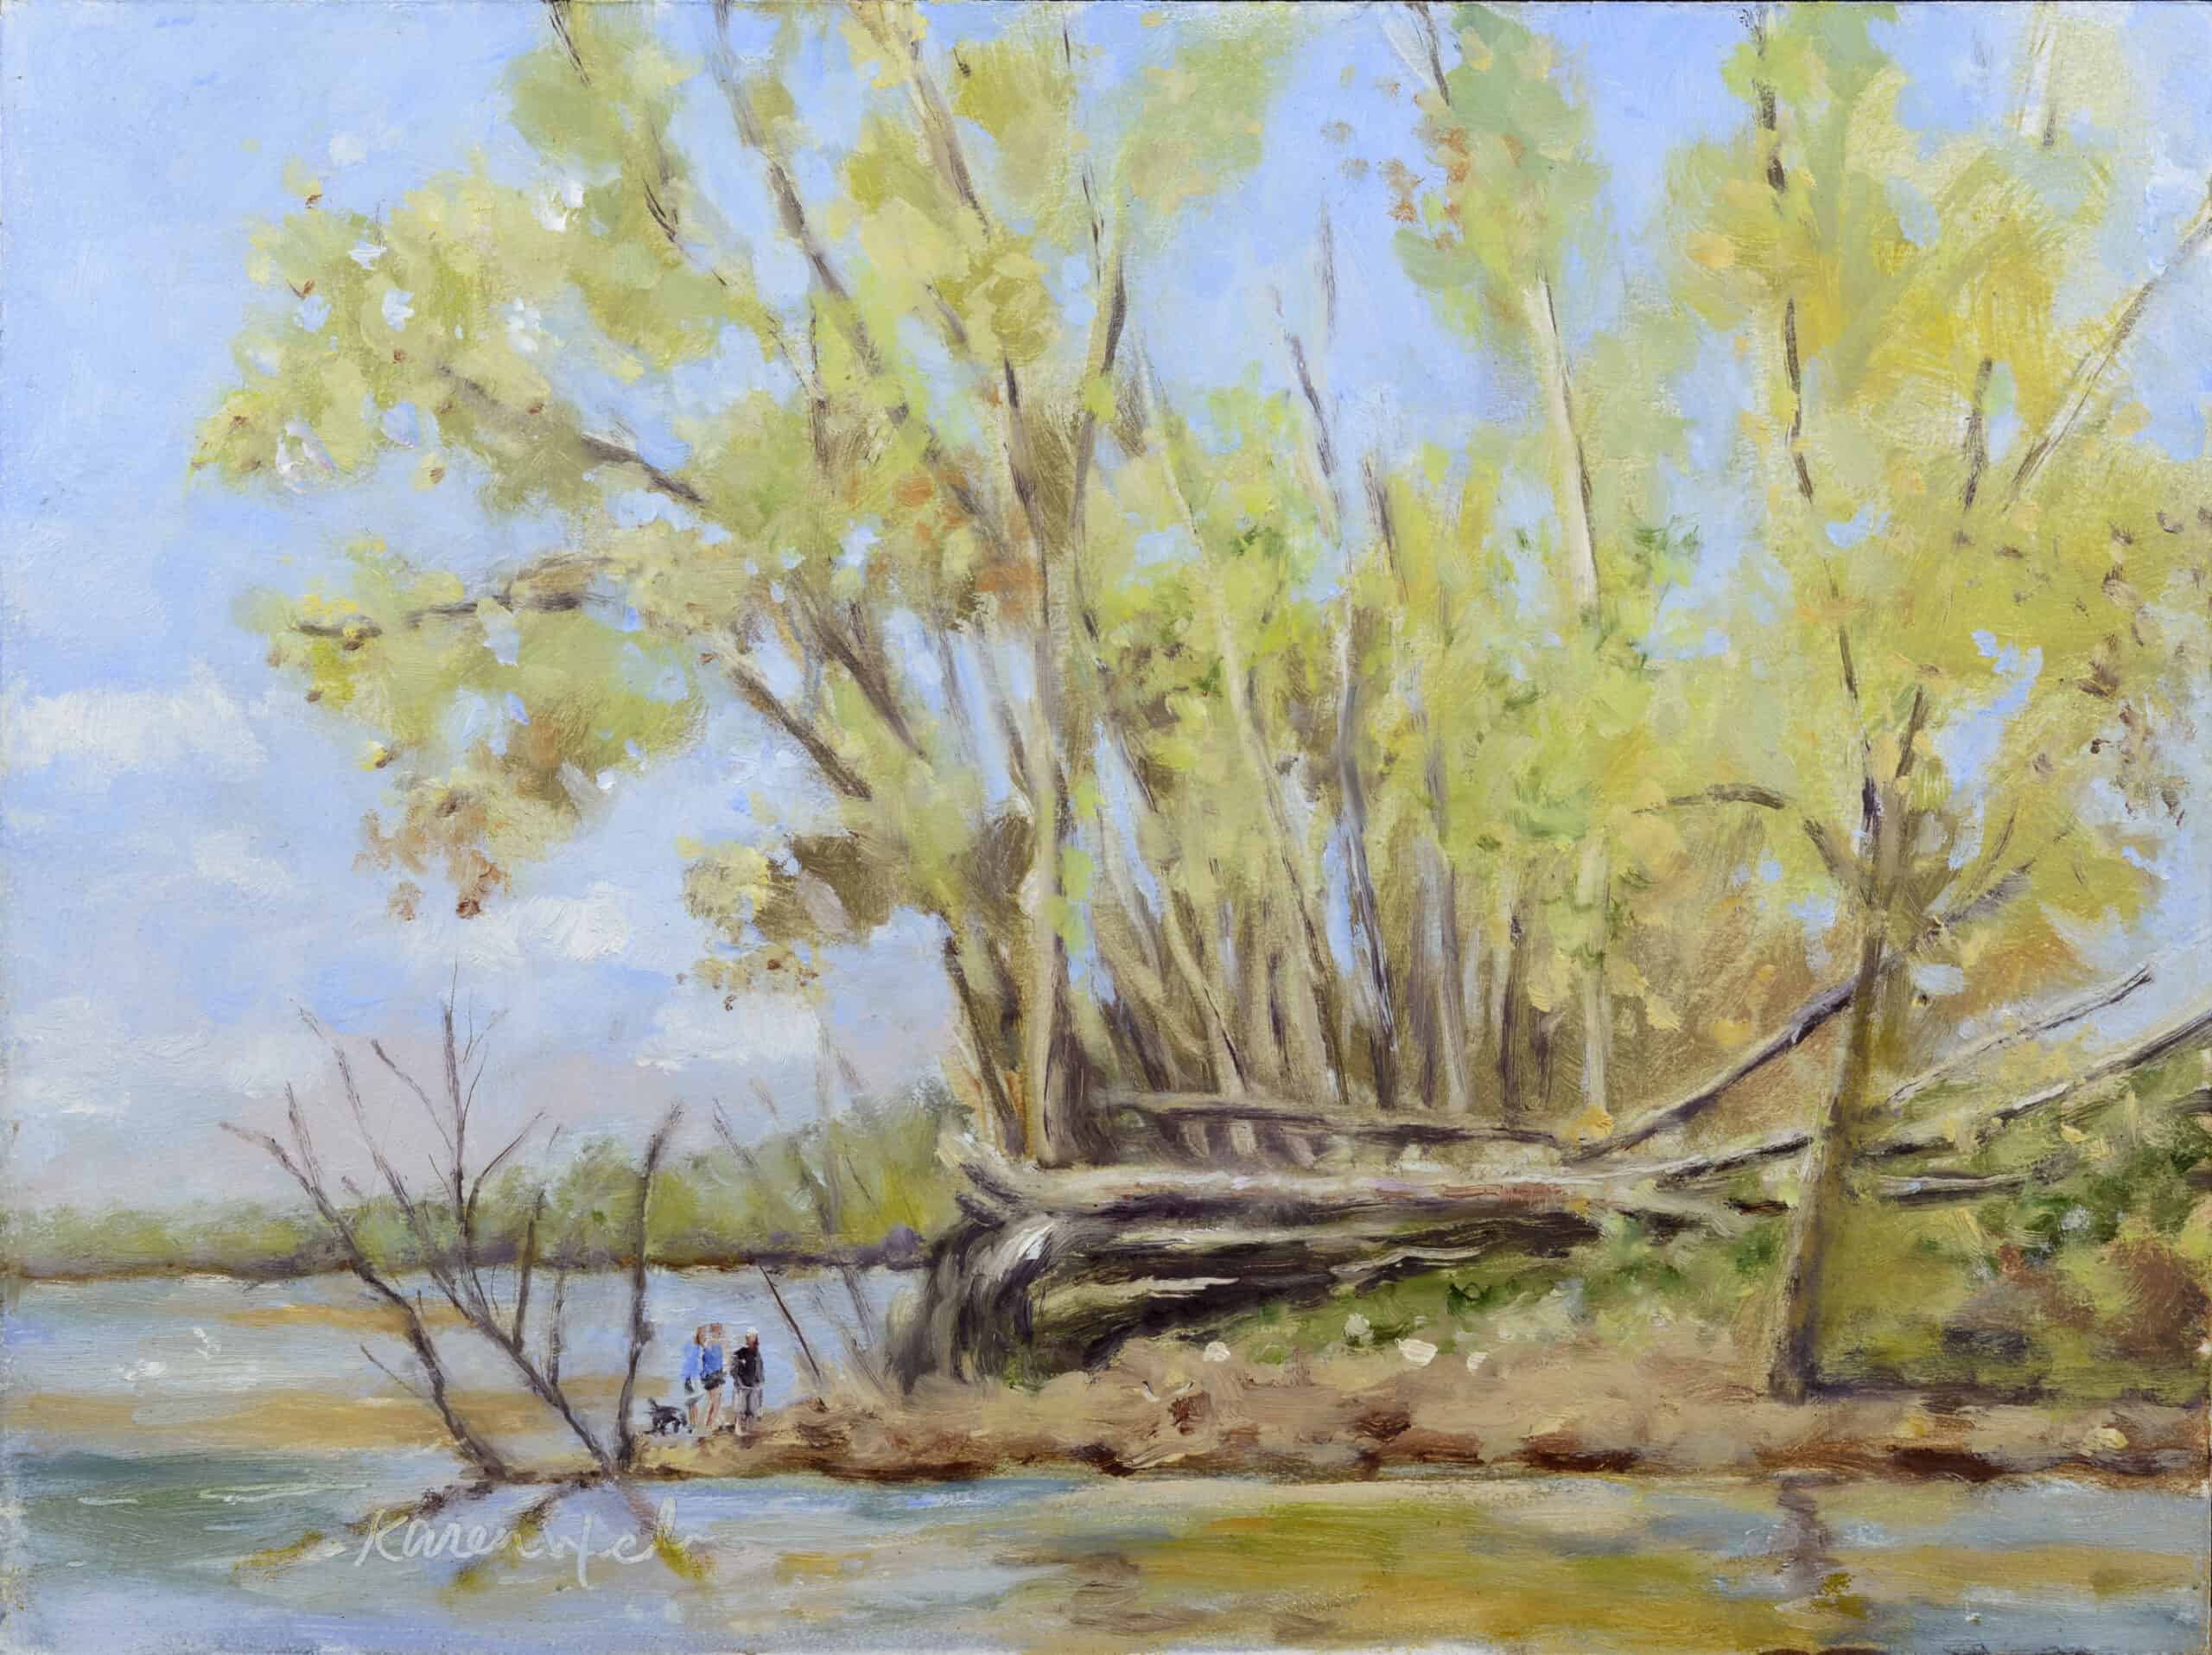 Landscape painting of Creek and trees by artist Karen Weber